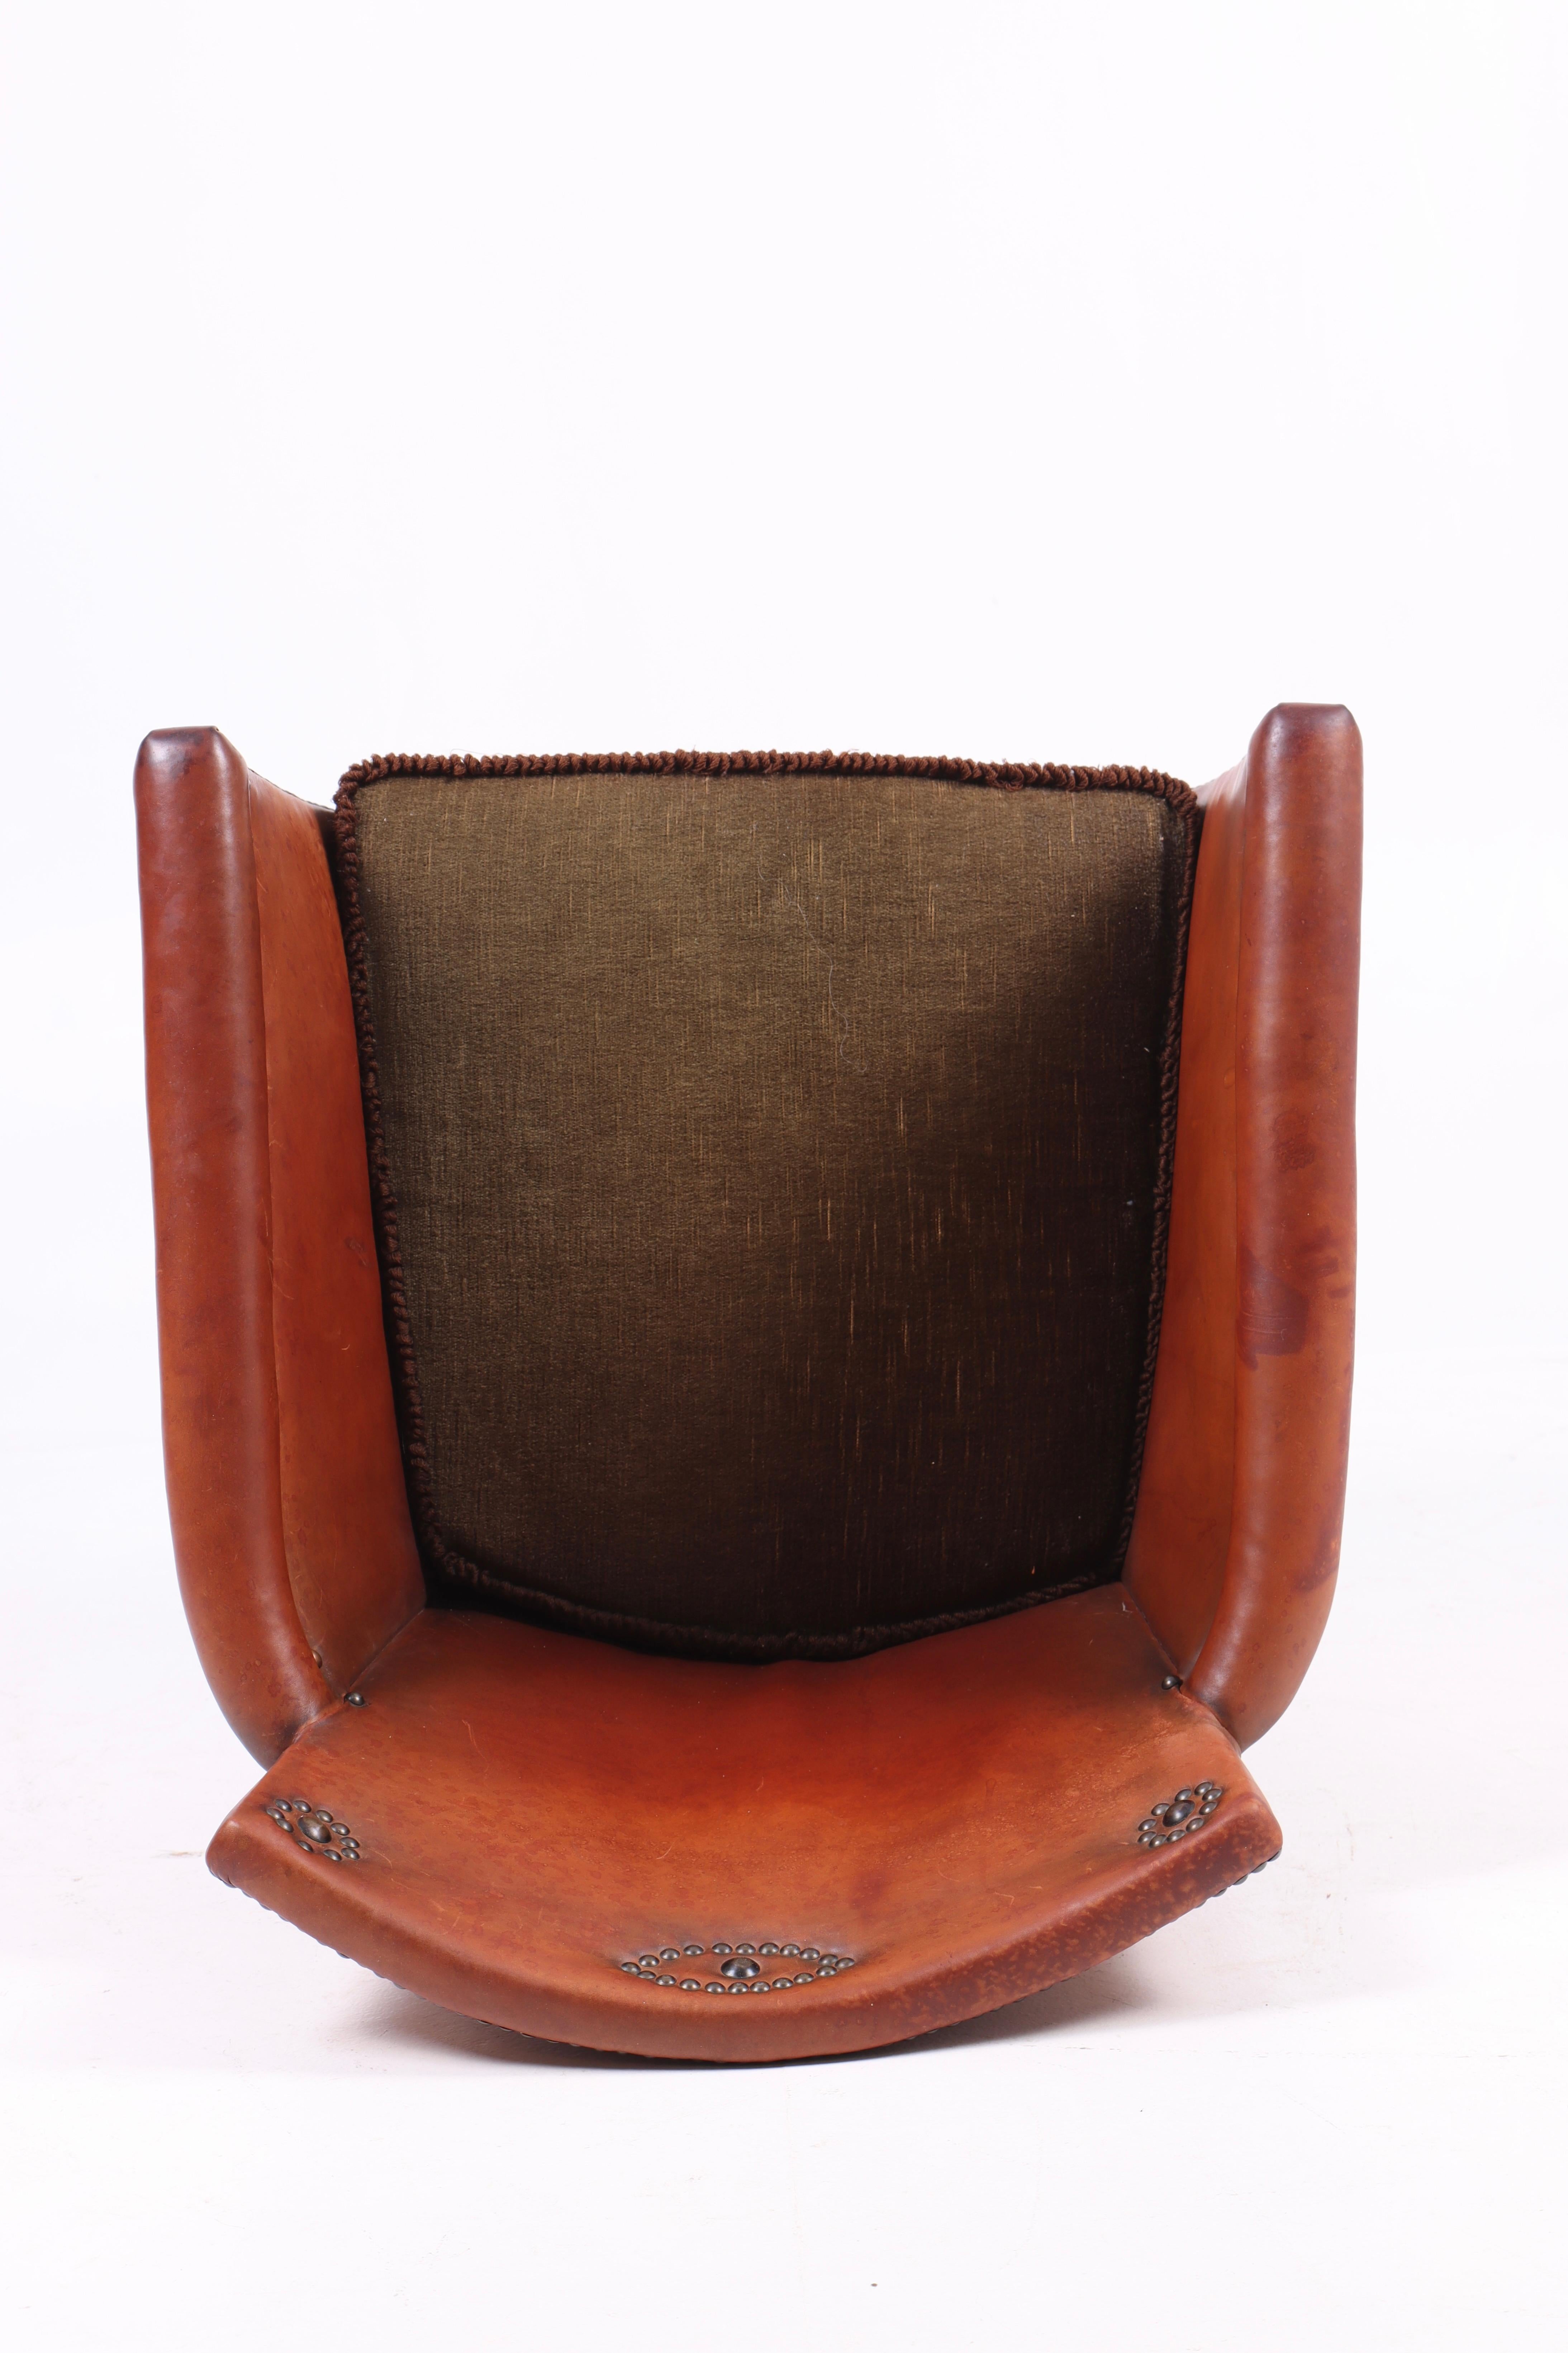 Lounge Chair in Patinated Leather, Designed by Otto Schulz 1